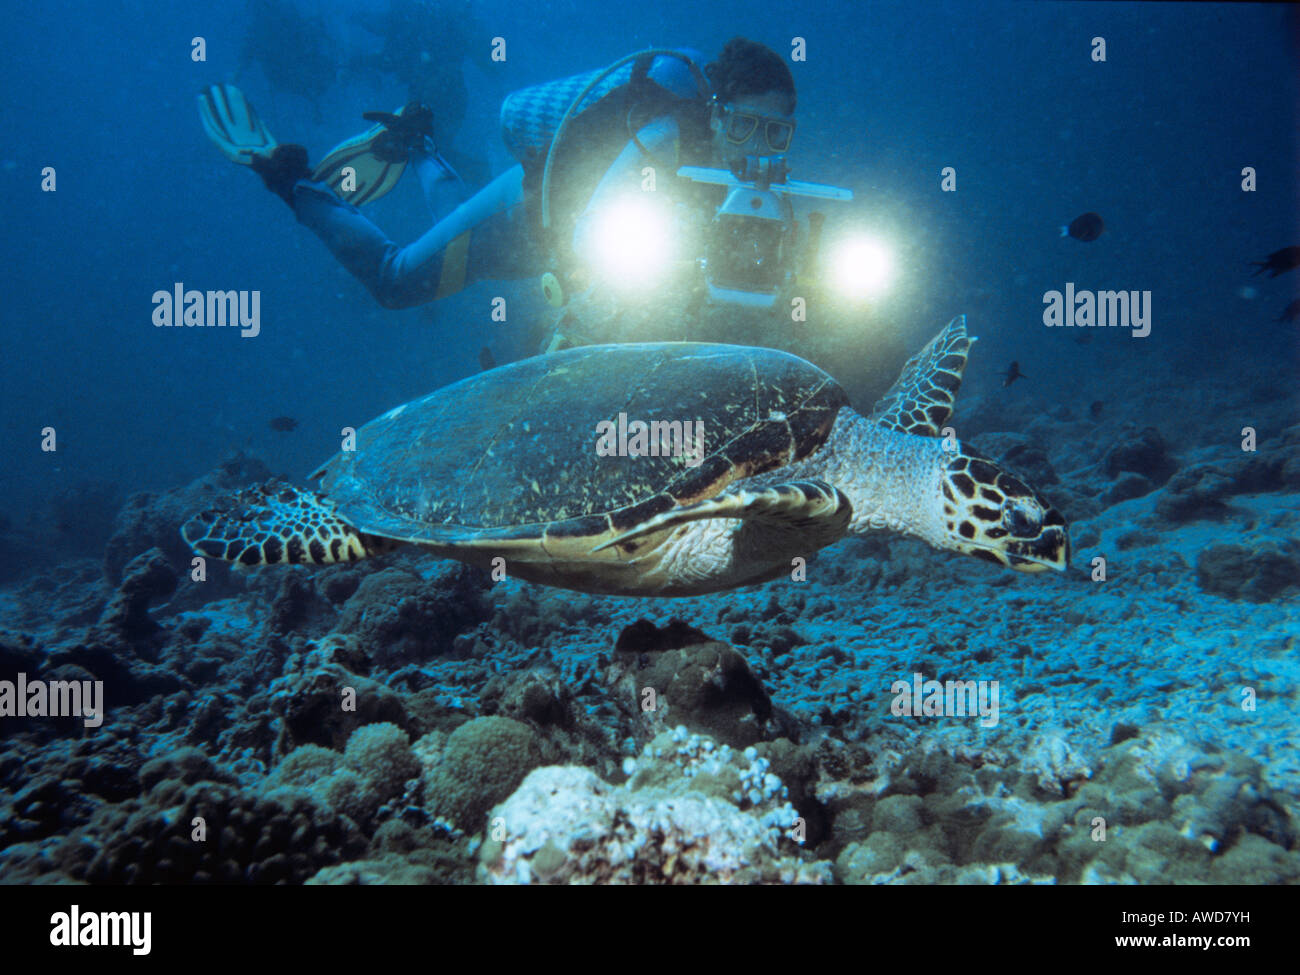 Sea Turtle (Cheloniidae) and scuba diver, underwater photograph, Indian Ocean Stock Photo